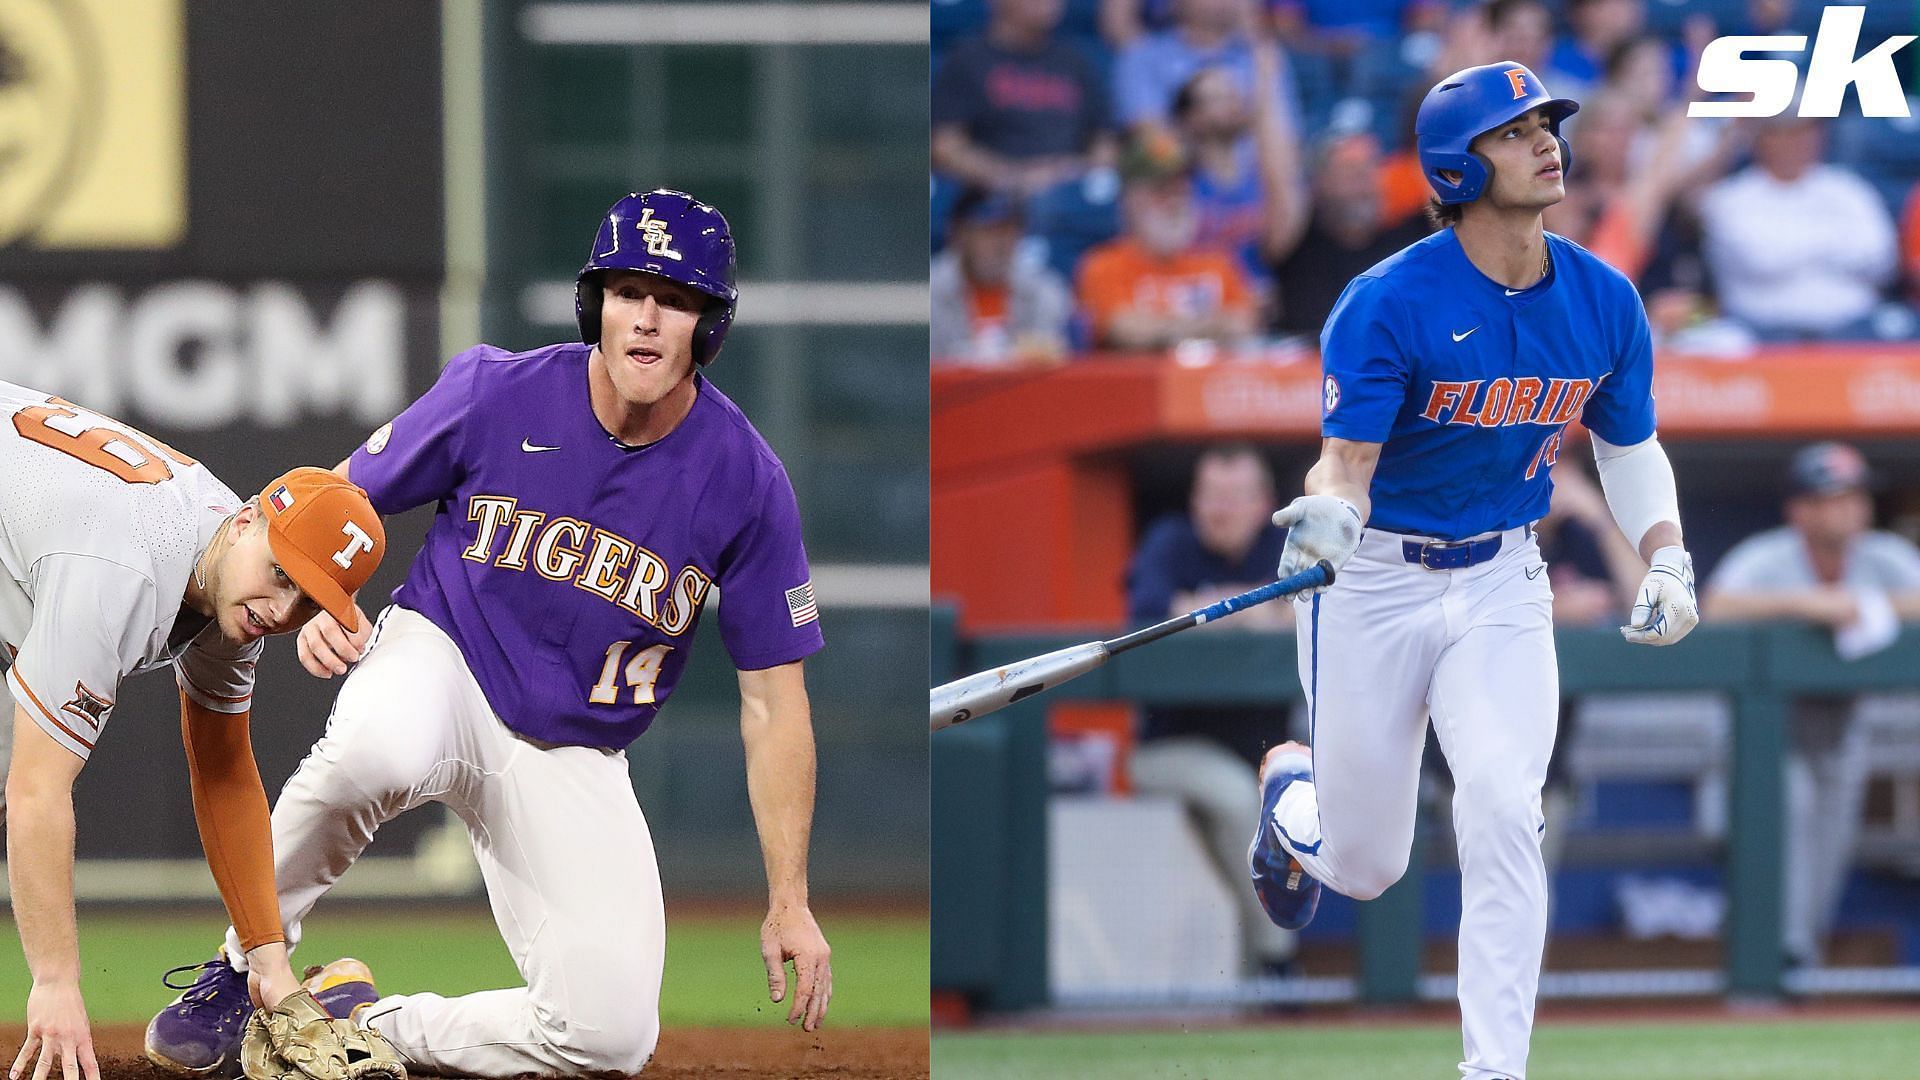 How to watch College World Series 2023 Finals for free? Florida vs LSU